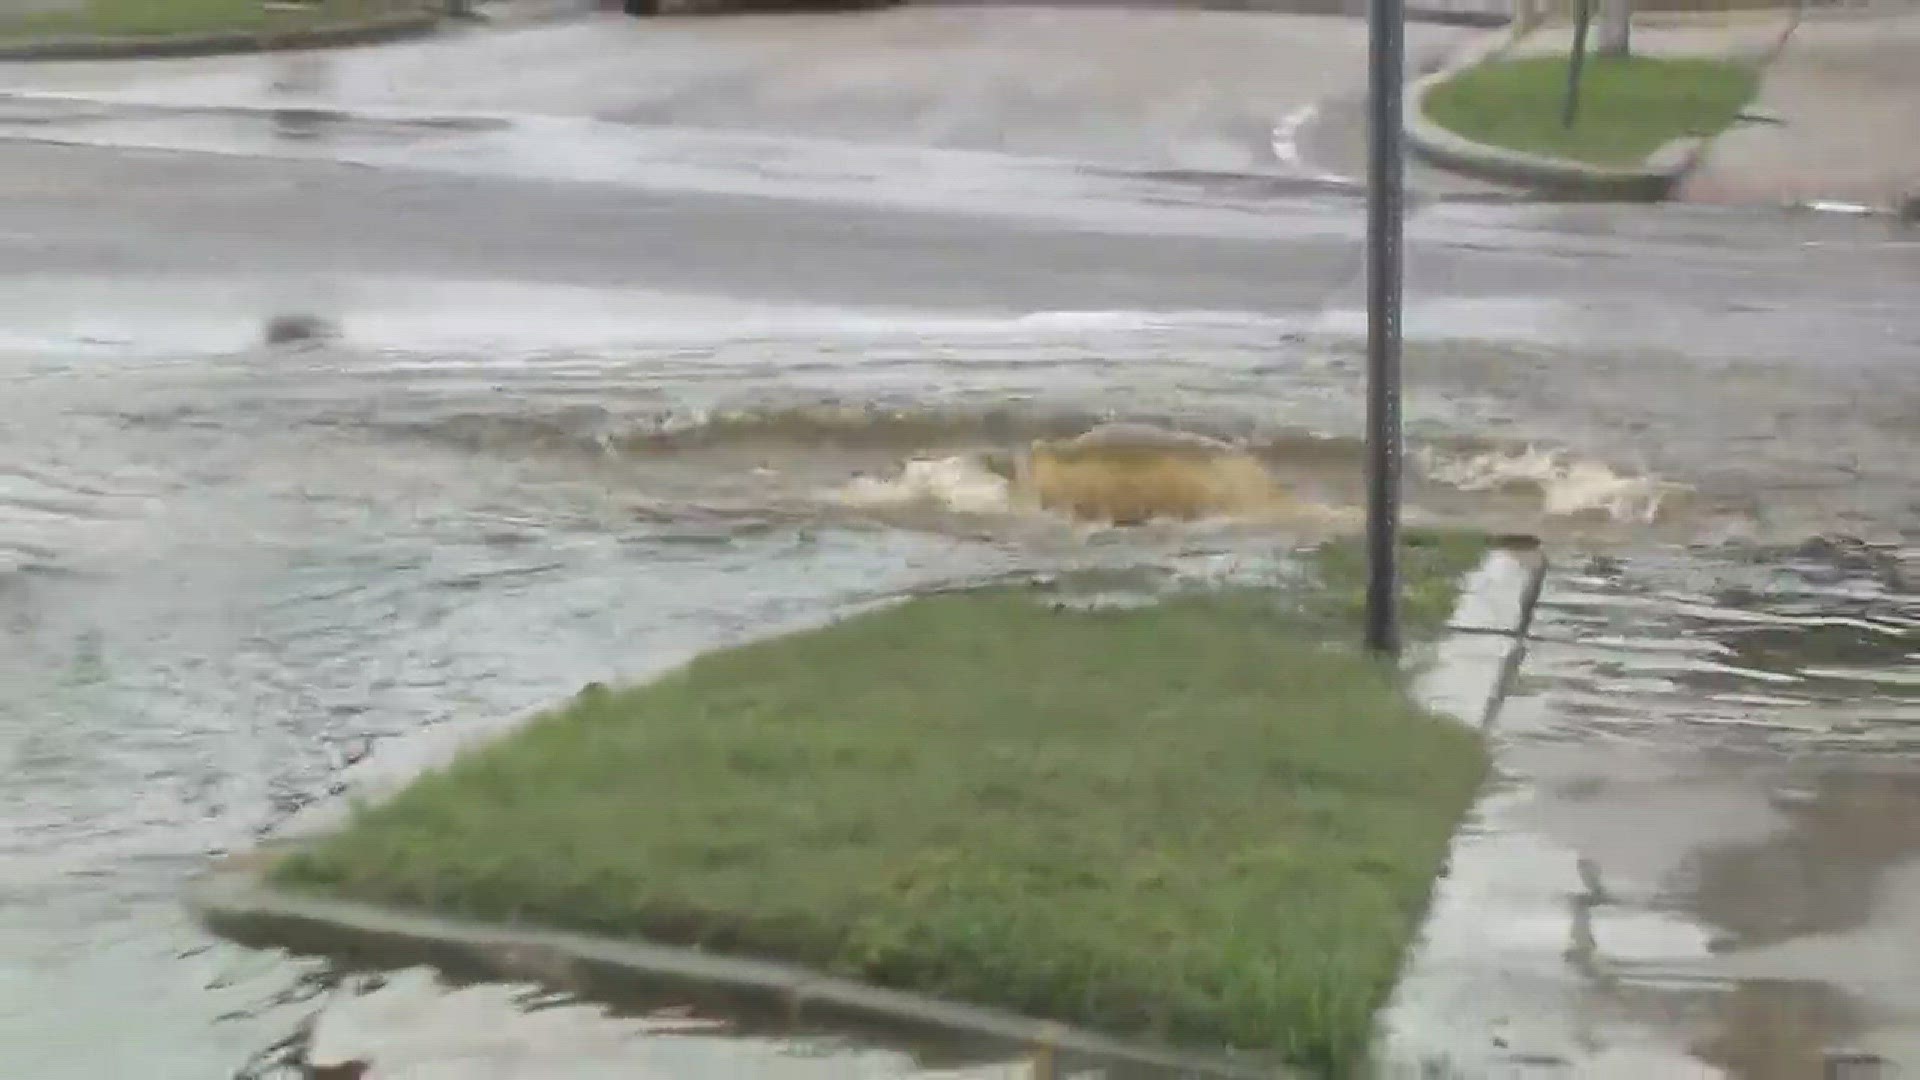 Following heavy rains Wednesday, a sewer is overflowing Thursday morning with smelly water at a busy Metairie intersection.